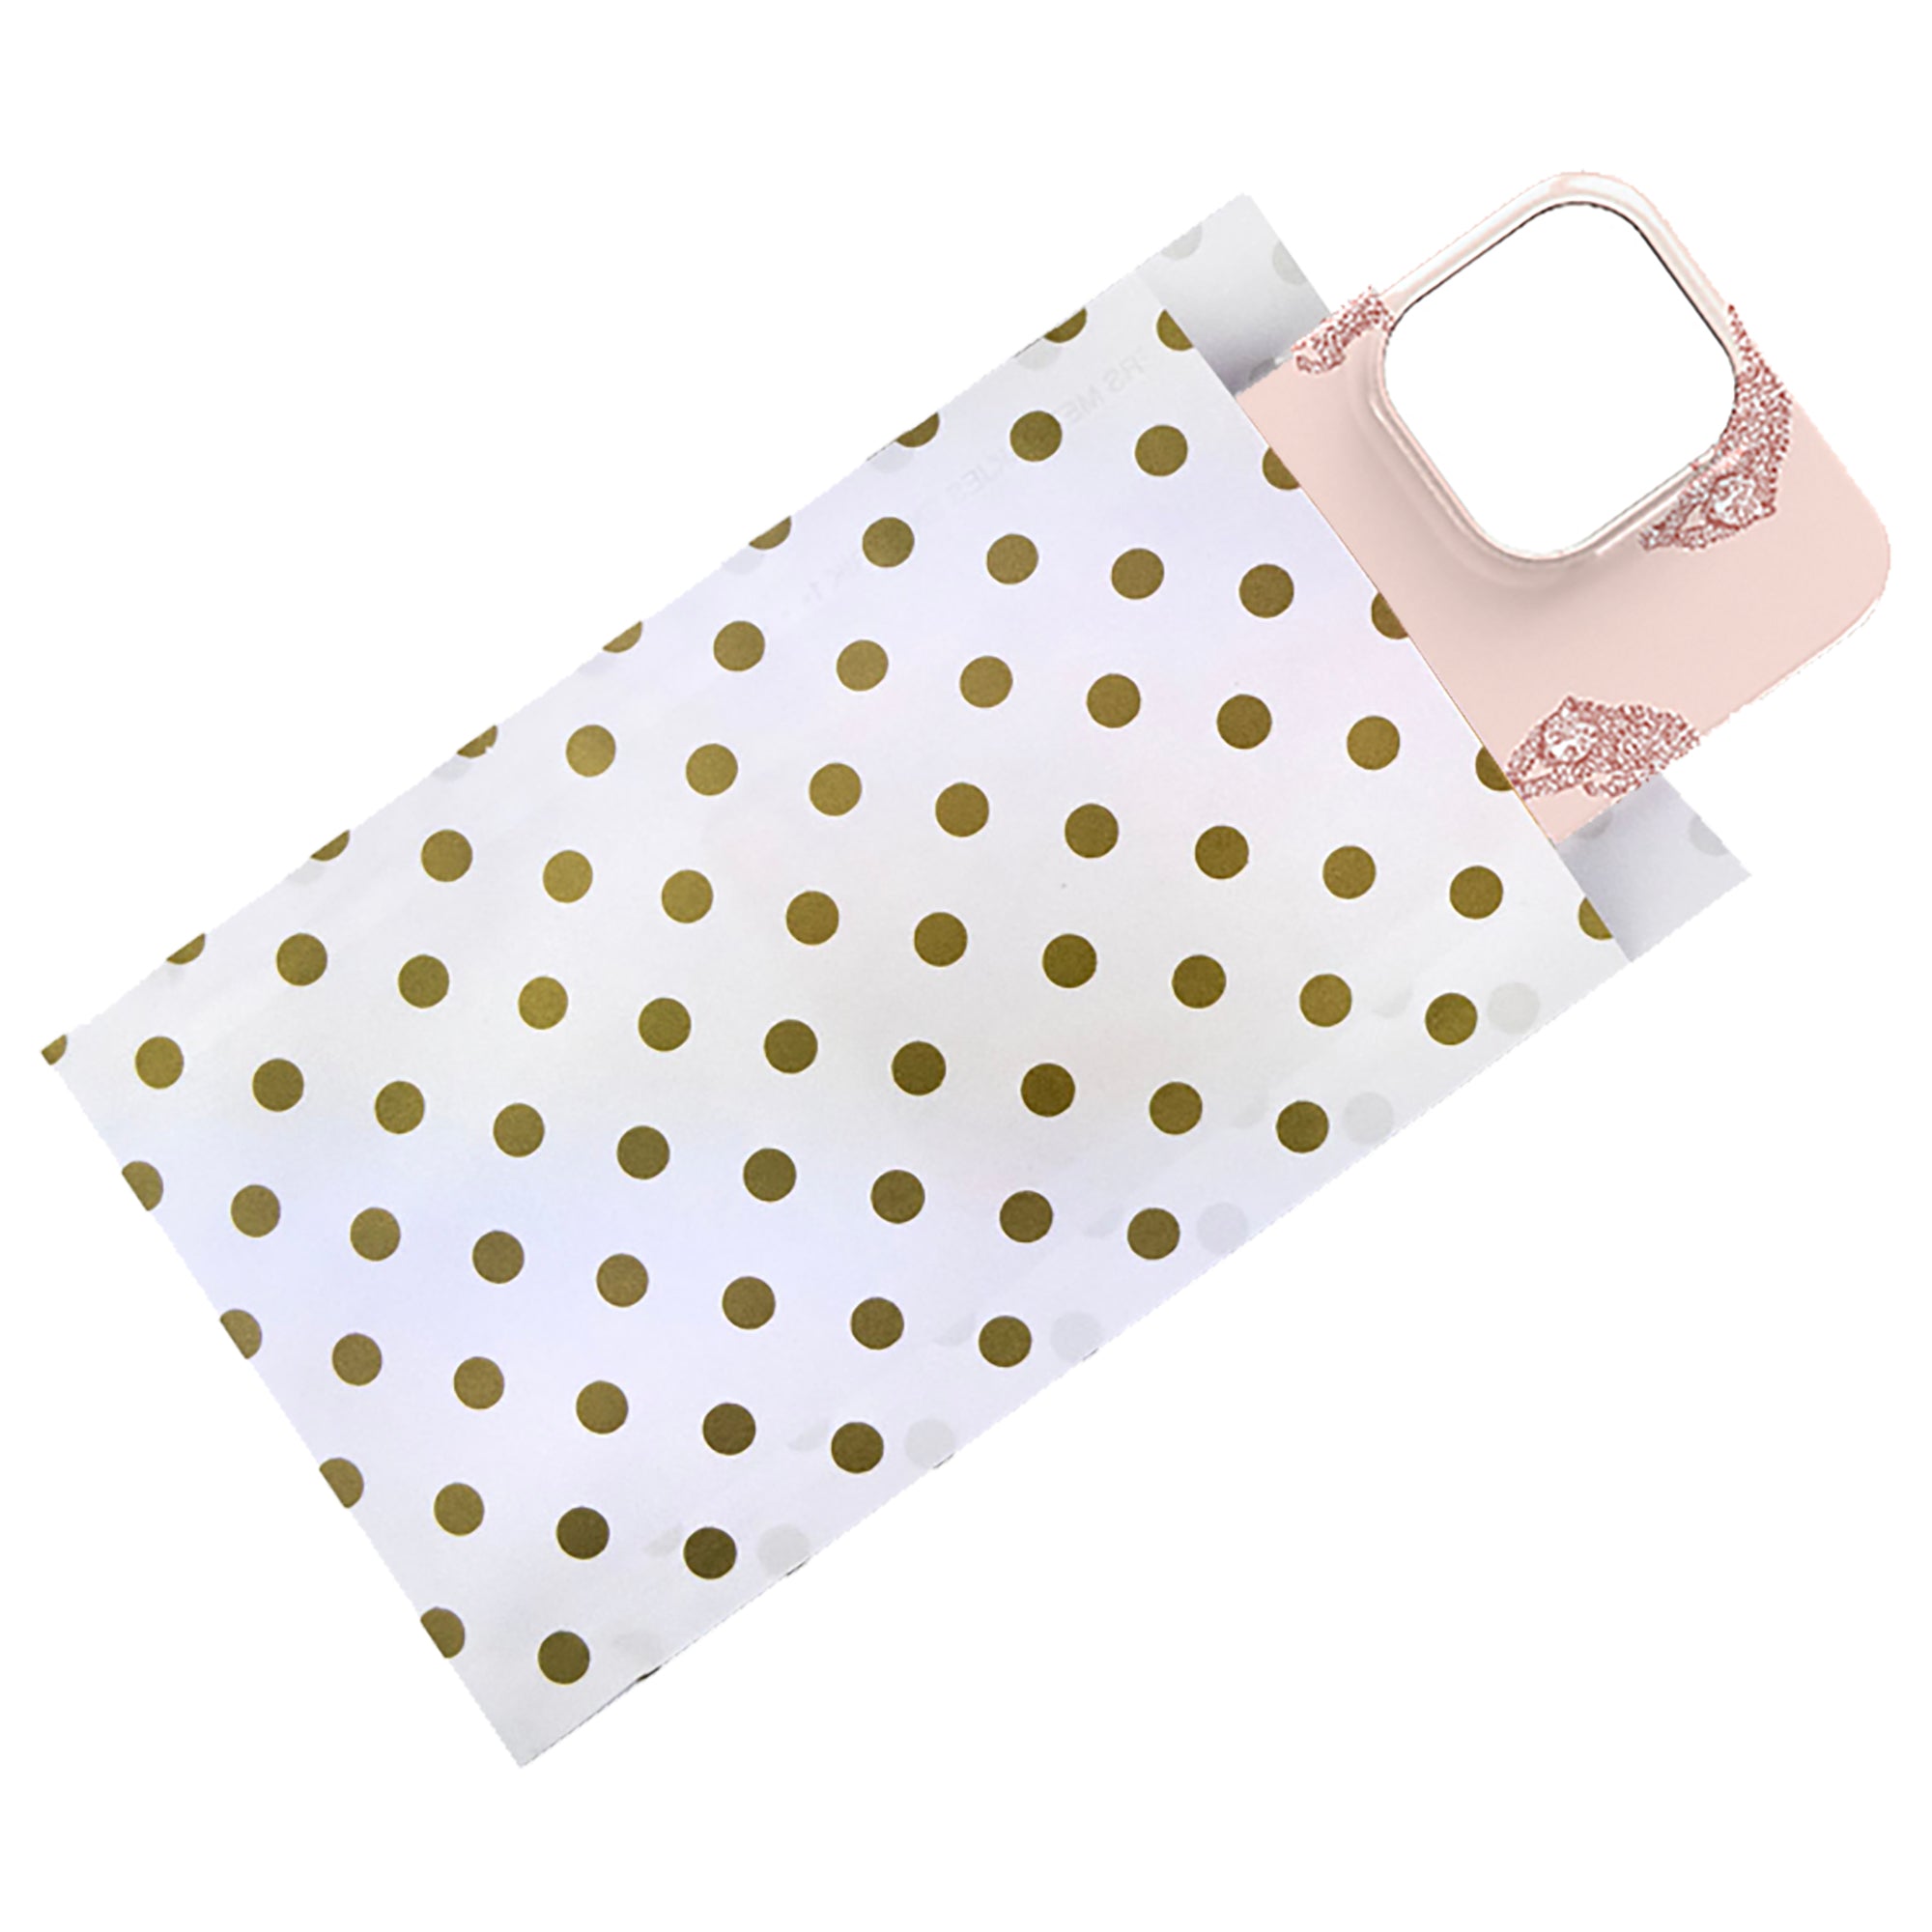 Pink and white Presentpåse - Dots gift bag adorned with gold dots.